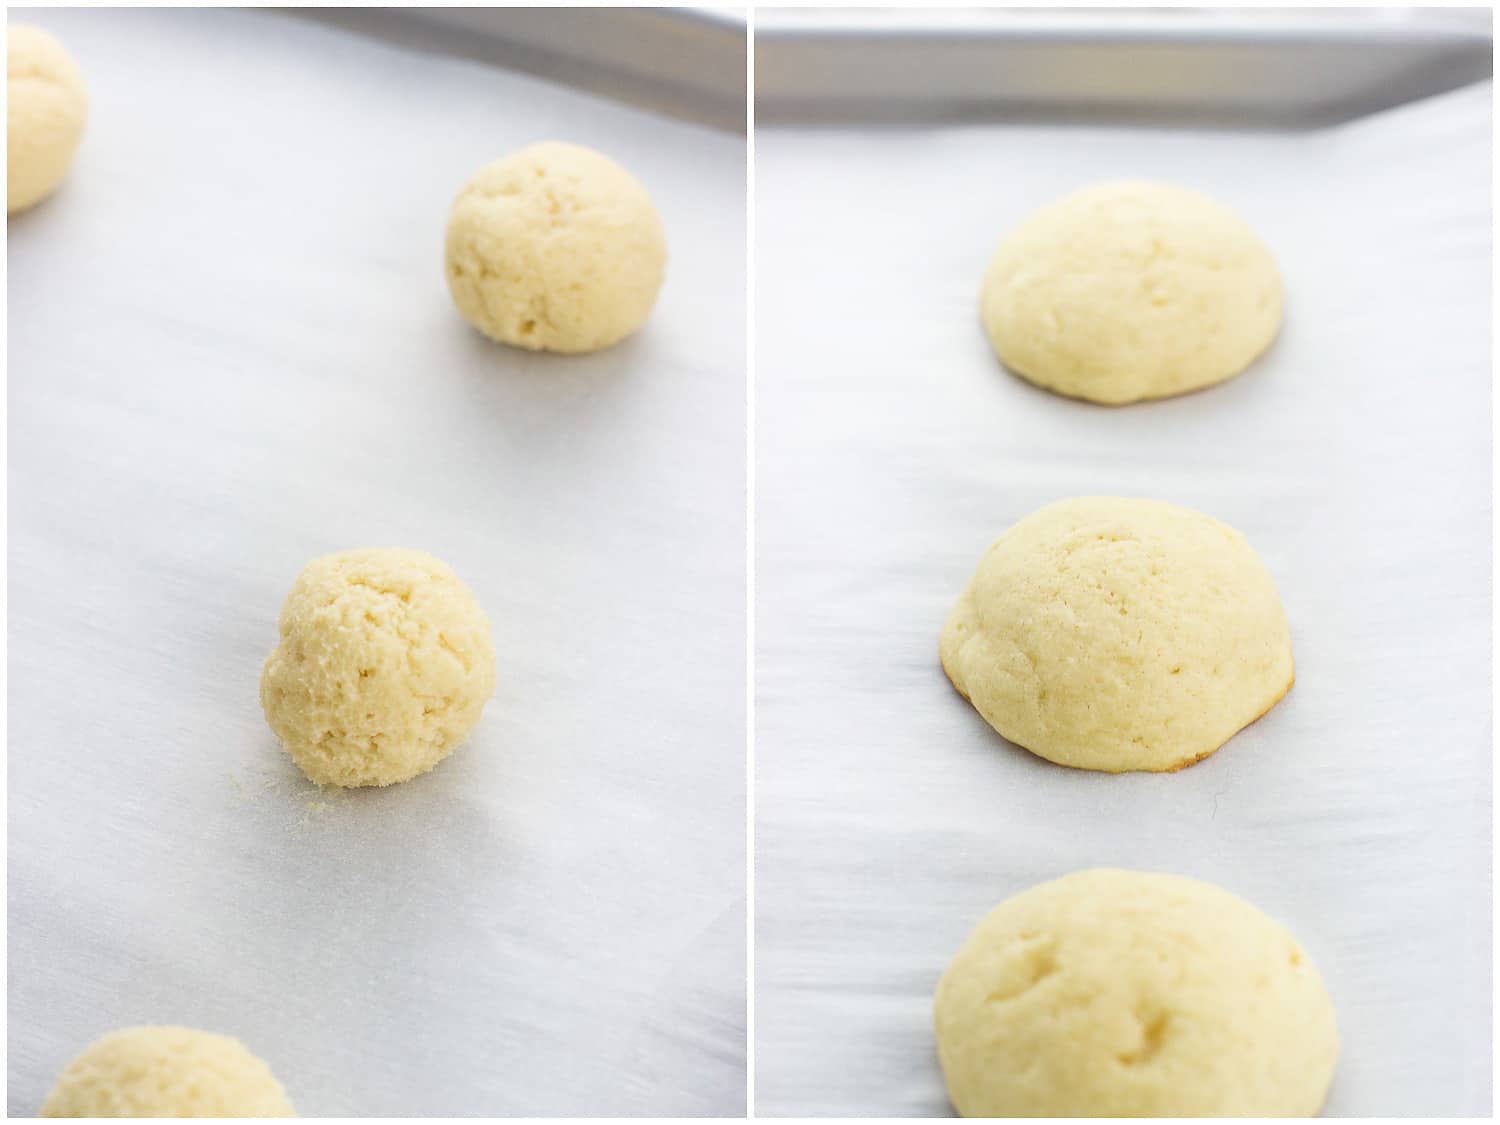 A side-by-side photo collage of unbaked ricotta cookie dough on a baking sheet (left) and baked cookies on a baking sheet (right).